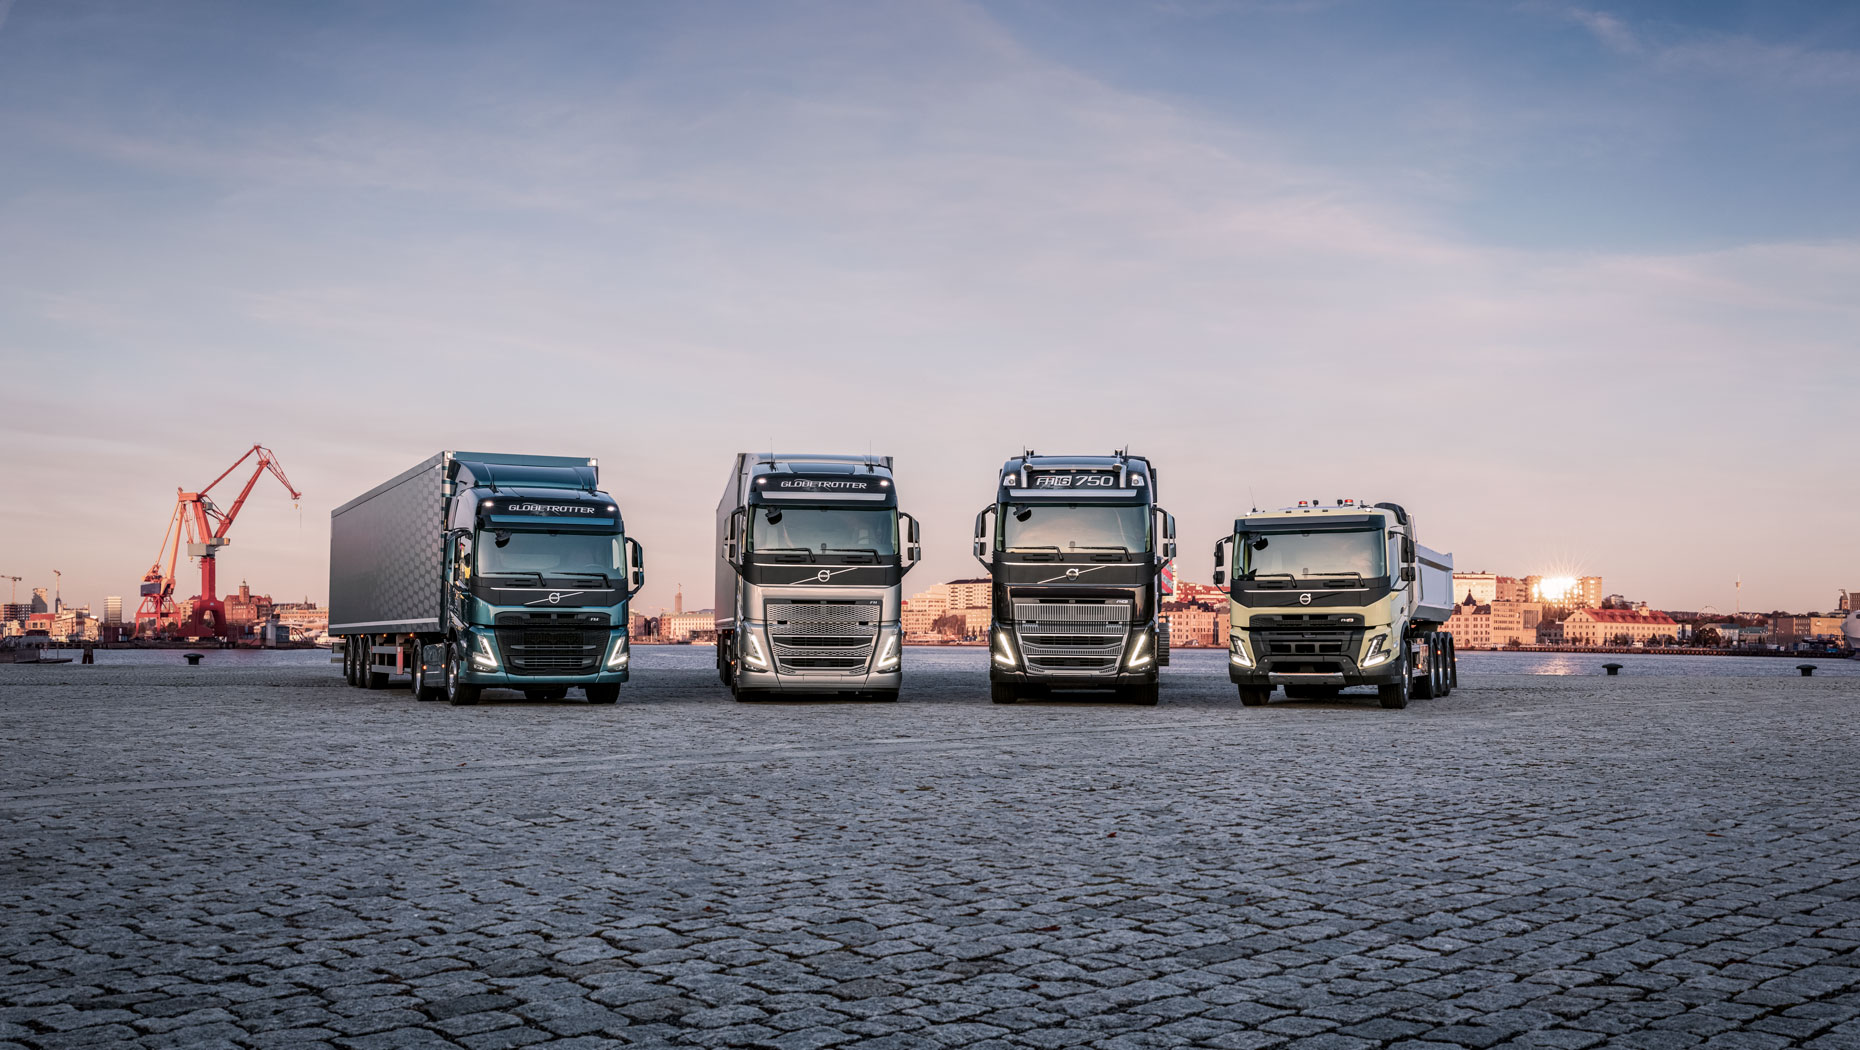 The Future of Trucking Isn't Batteries Yet, Says Volvo - Bloomberg